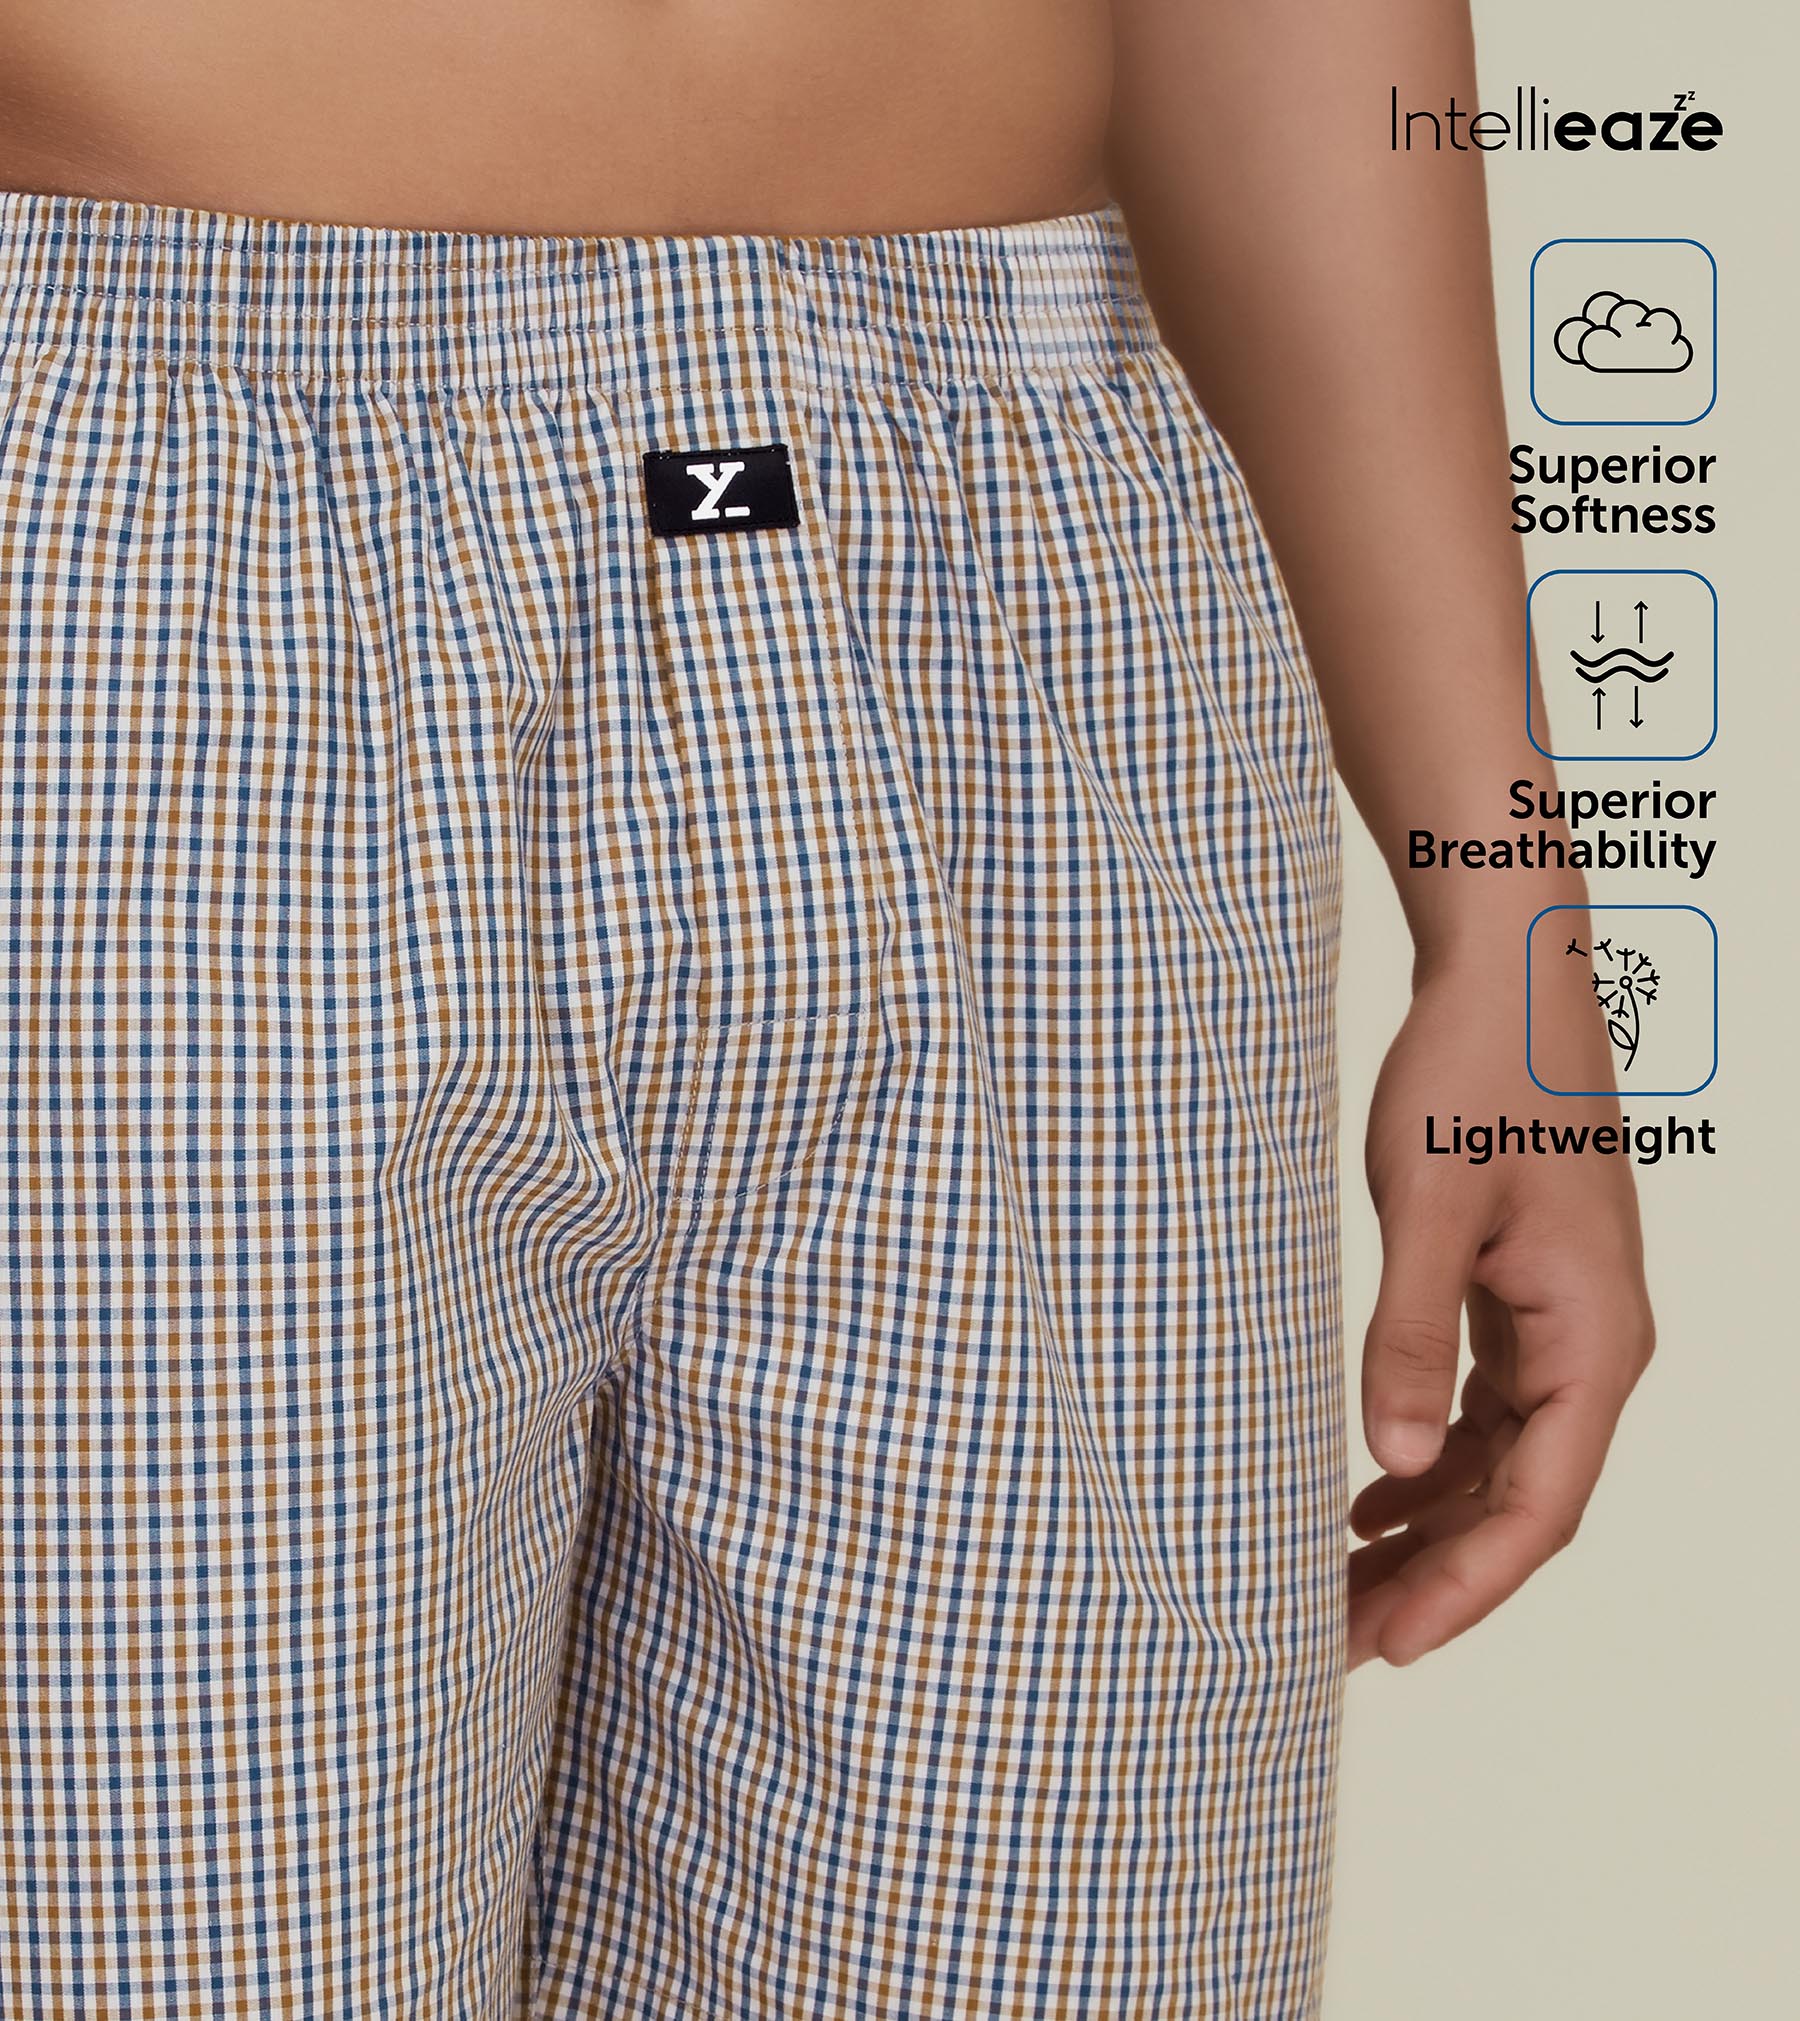 Checkmate Combed Cotton Boxer Shorts For Men Sandy Grey - XYXX Mens Apparels